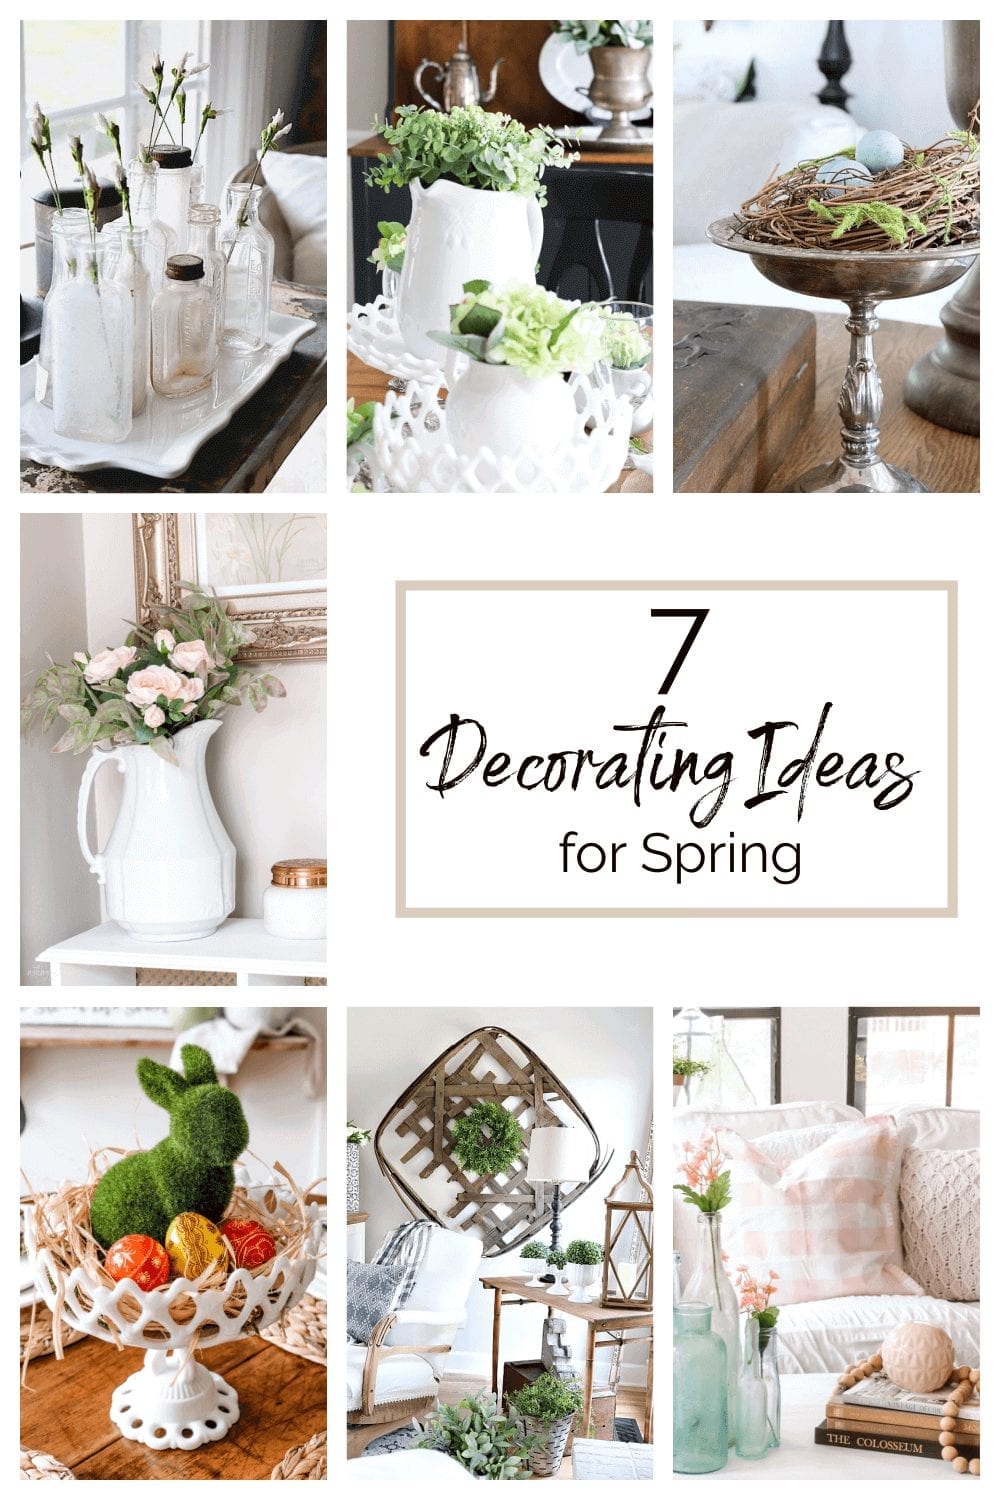 Welcome Home Saturday: 7 Decorating ideas for Spring